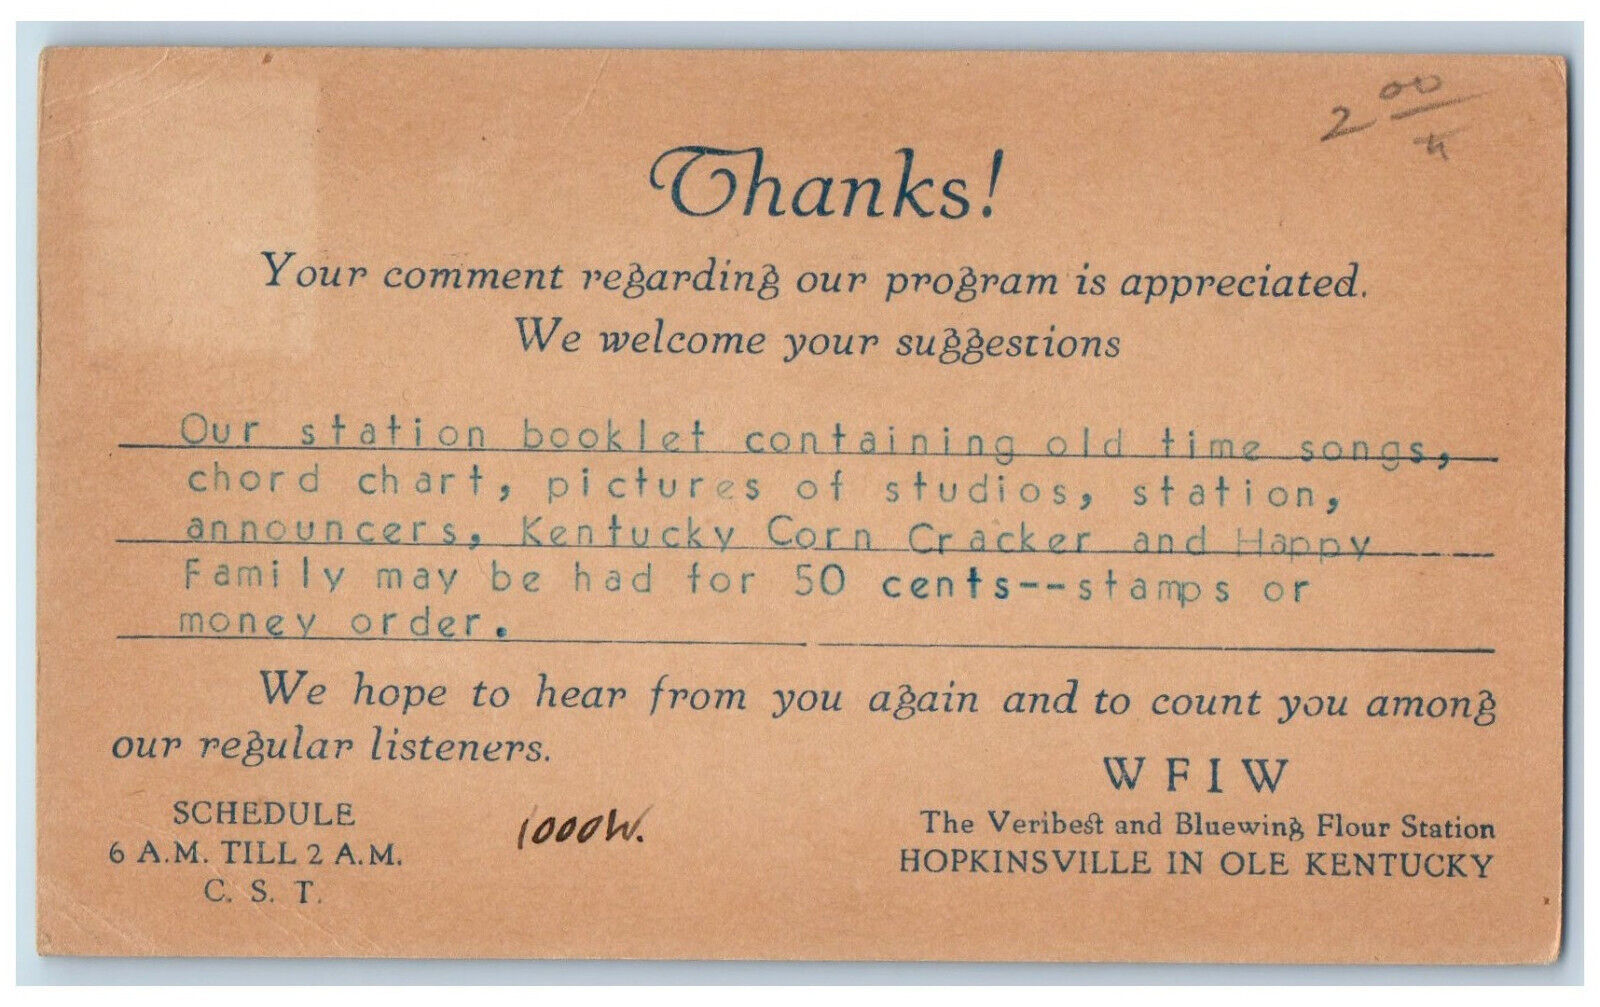 Hopkinsville KY Postal Card WFIW Veribest Bluewing Flour Station 1932 Posted